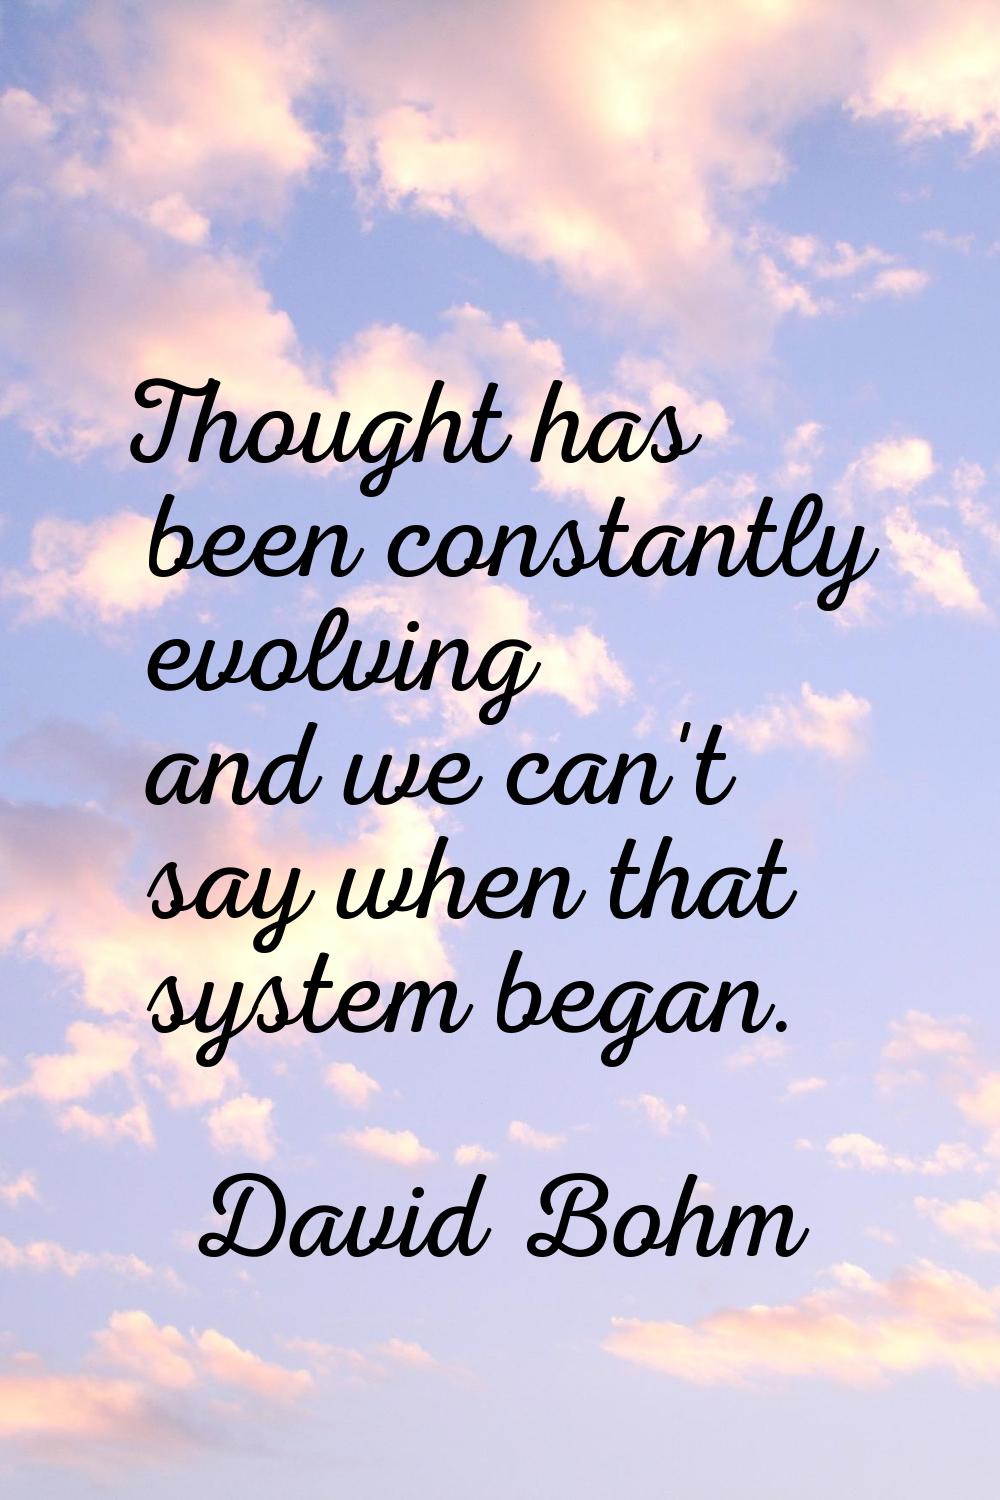 Thought has been constantly evolving and we can't say when that system began.